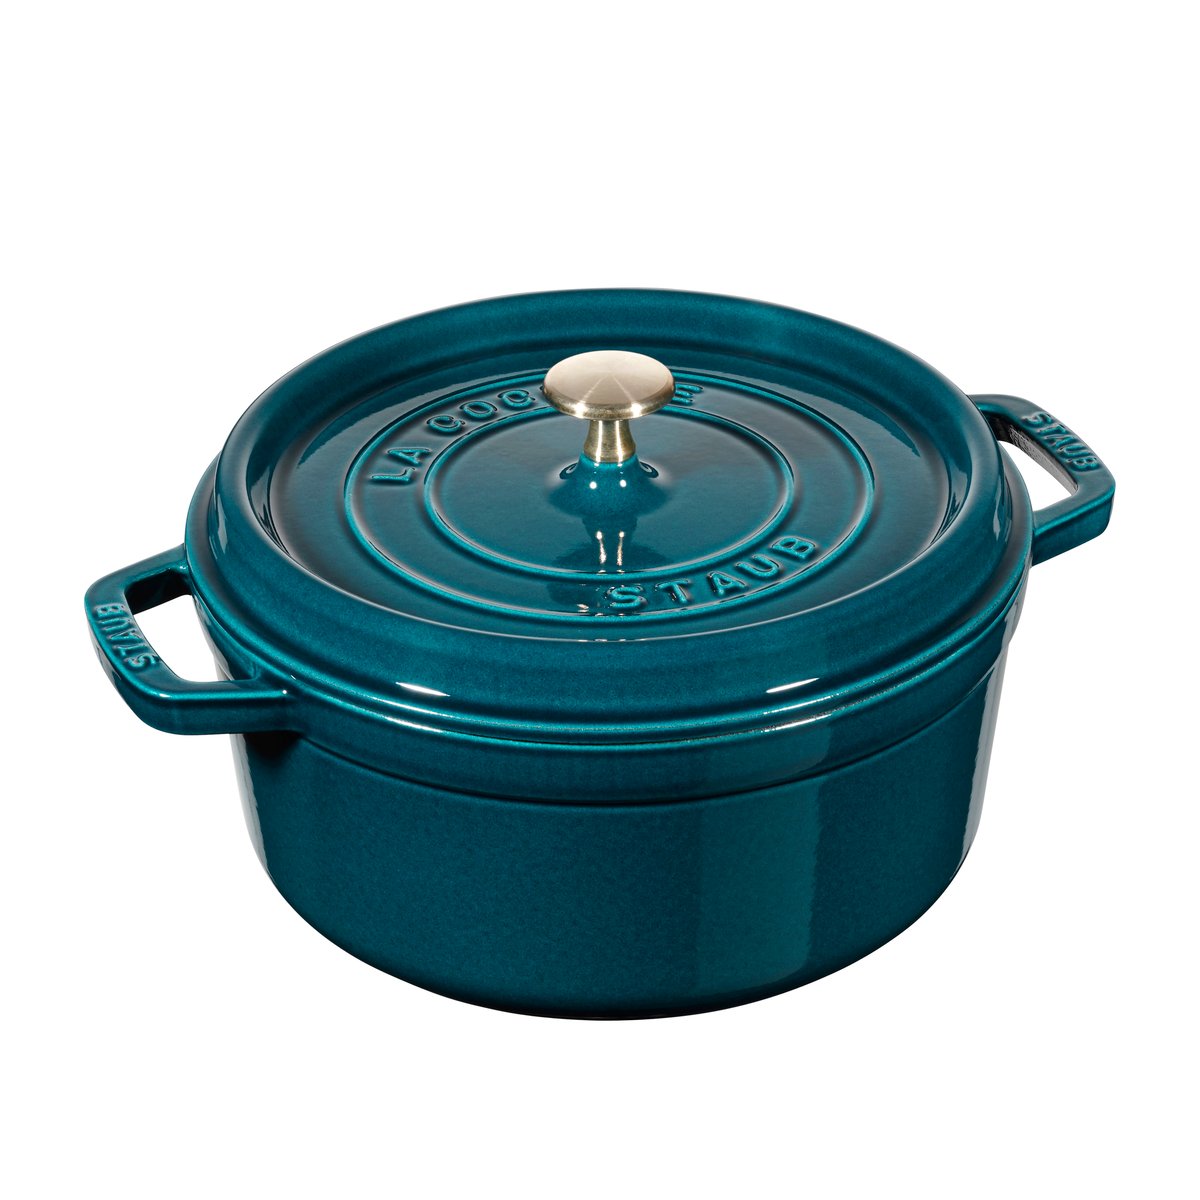 STAUB La Mer ronde braadpan, drielaags emaille 3,8 l